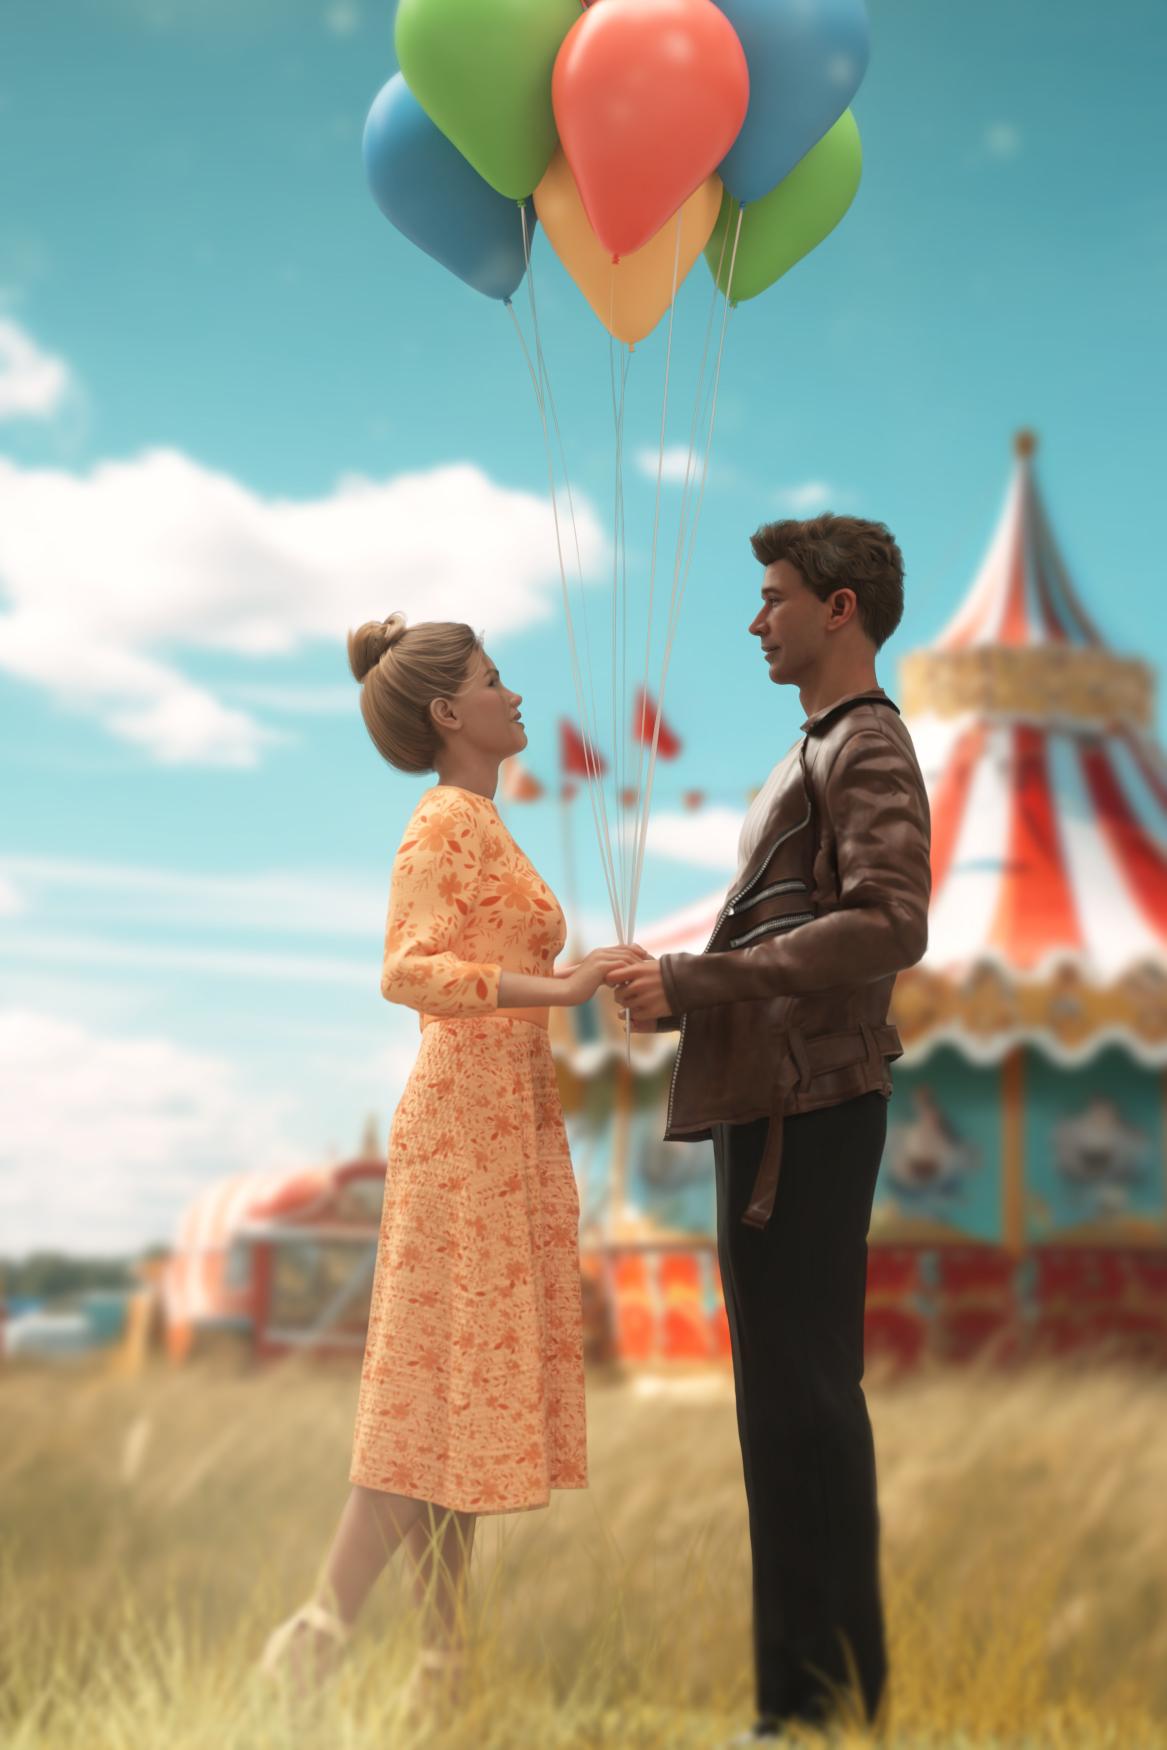 Fairground Affair - Couple stands facing each other with a fairground behind the in the distance while the man holds a bunch of baloons